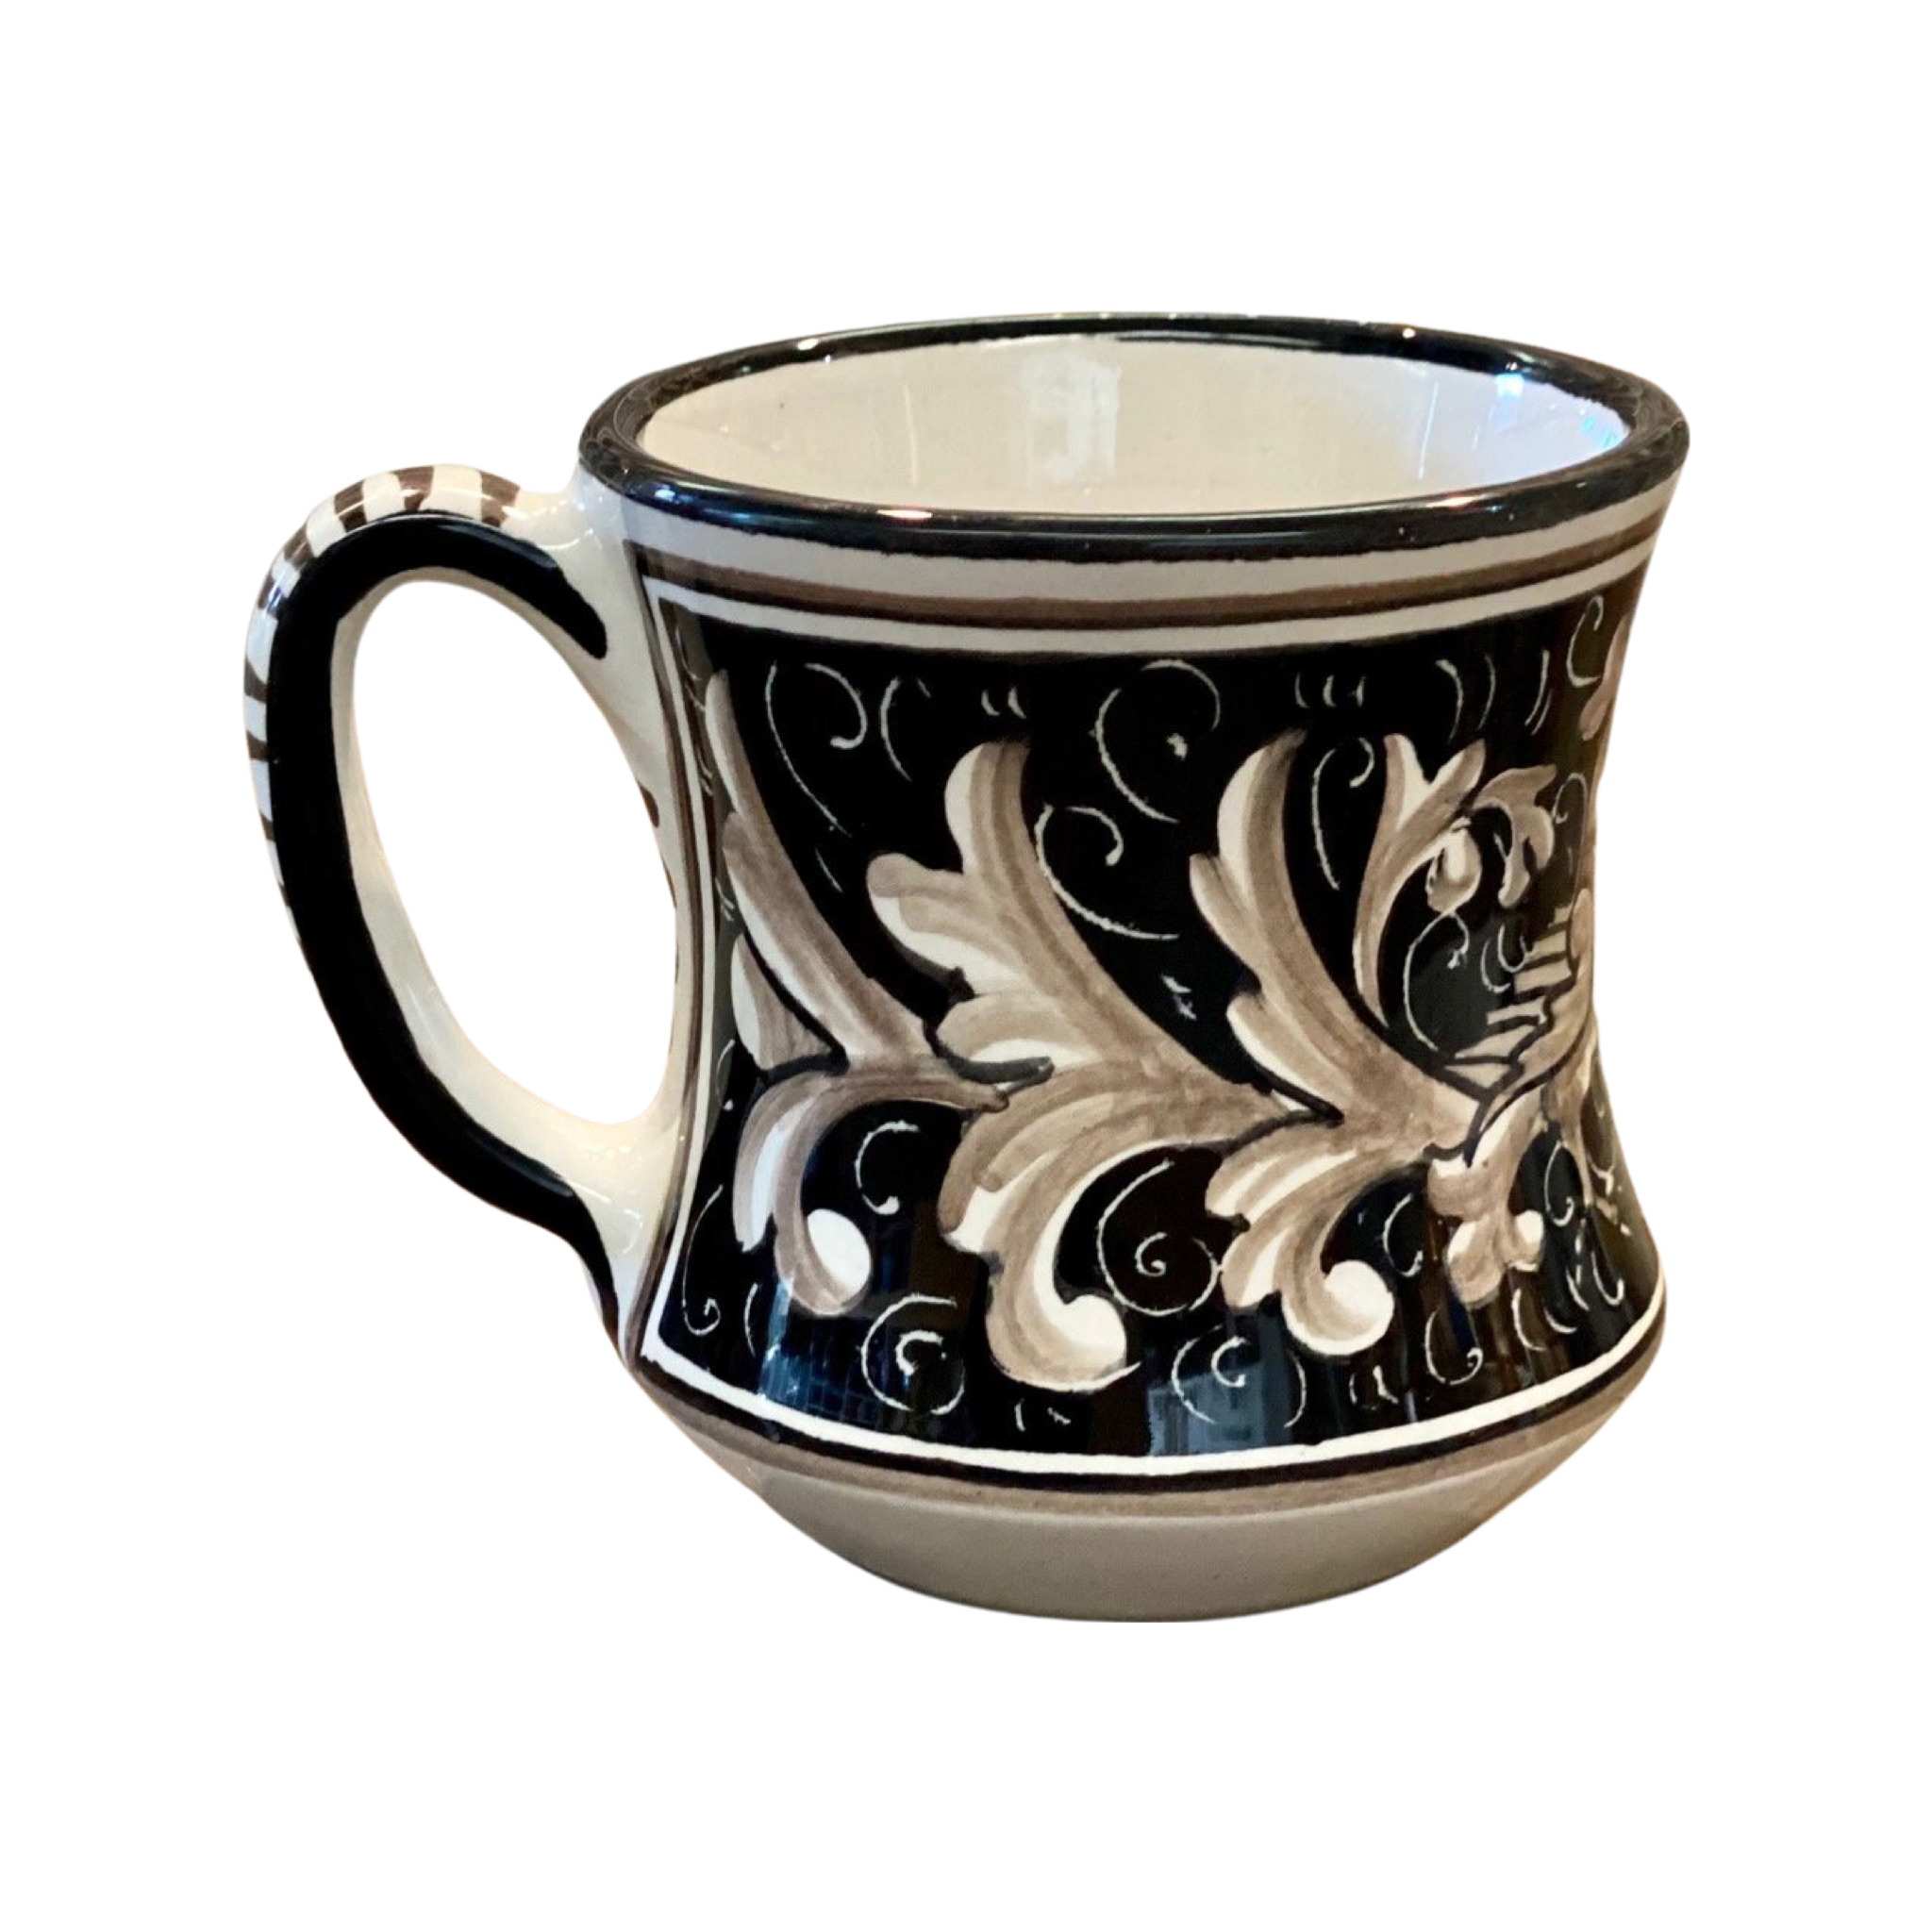 La Colombe Curved Mug, ceramics, pottery, italian design, majolica, handmade, handcrafted, handpainted, home decor, kitchen art, home goods, deruta, majolica, Artisan, treasures, traditional art, modern art, gift ideas, style, SF, shop small business, artists, shop online, landmark store, legacy, one of a kind, limited edition, gift guide, gift shop, retail shop, decorations, shopping, italy, home staging, home decorating, home interiors